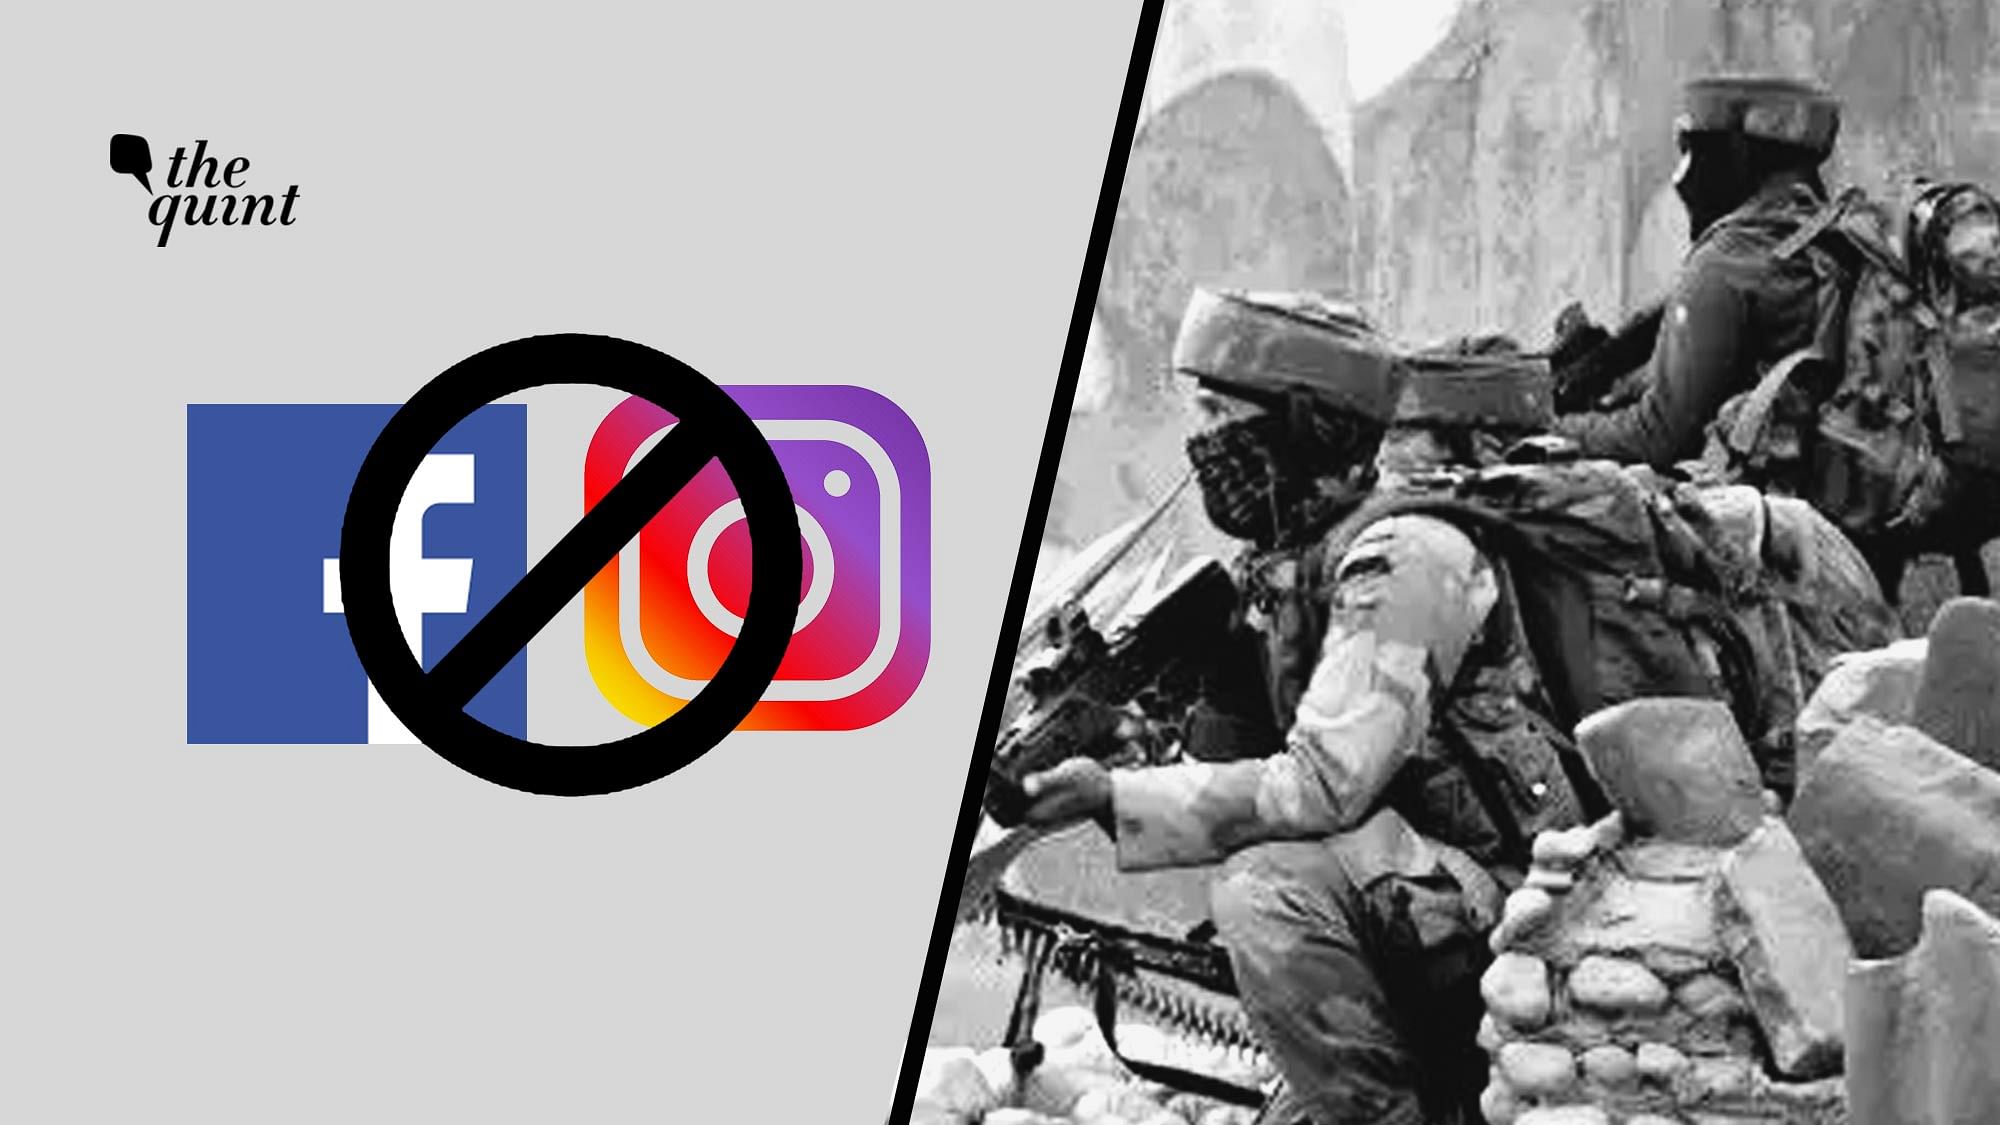 The Indian Army has banned the use of social media apps like Facebook and Instagram by its soldiers, in accordance with Central government policy. But a Lieutenant Colonel calls it a violation of his right to Freedom of Speech.